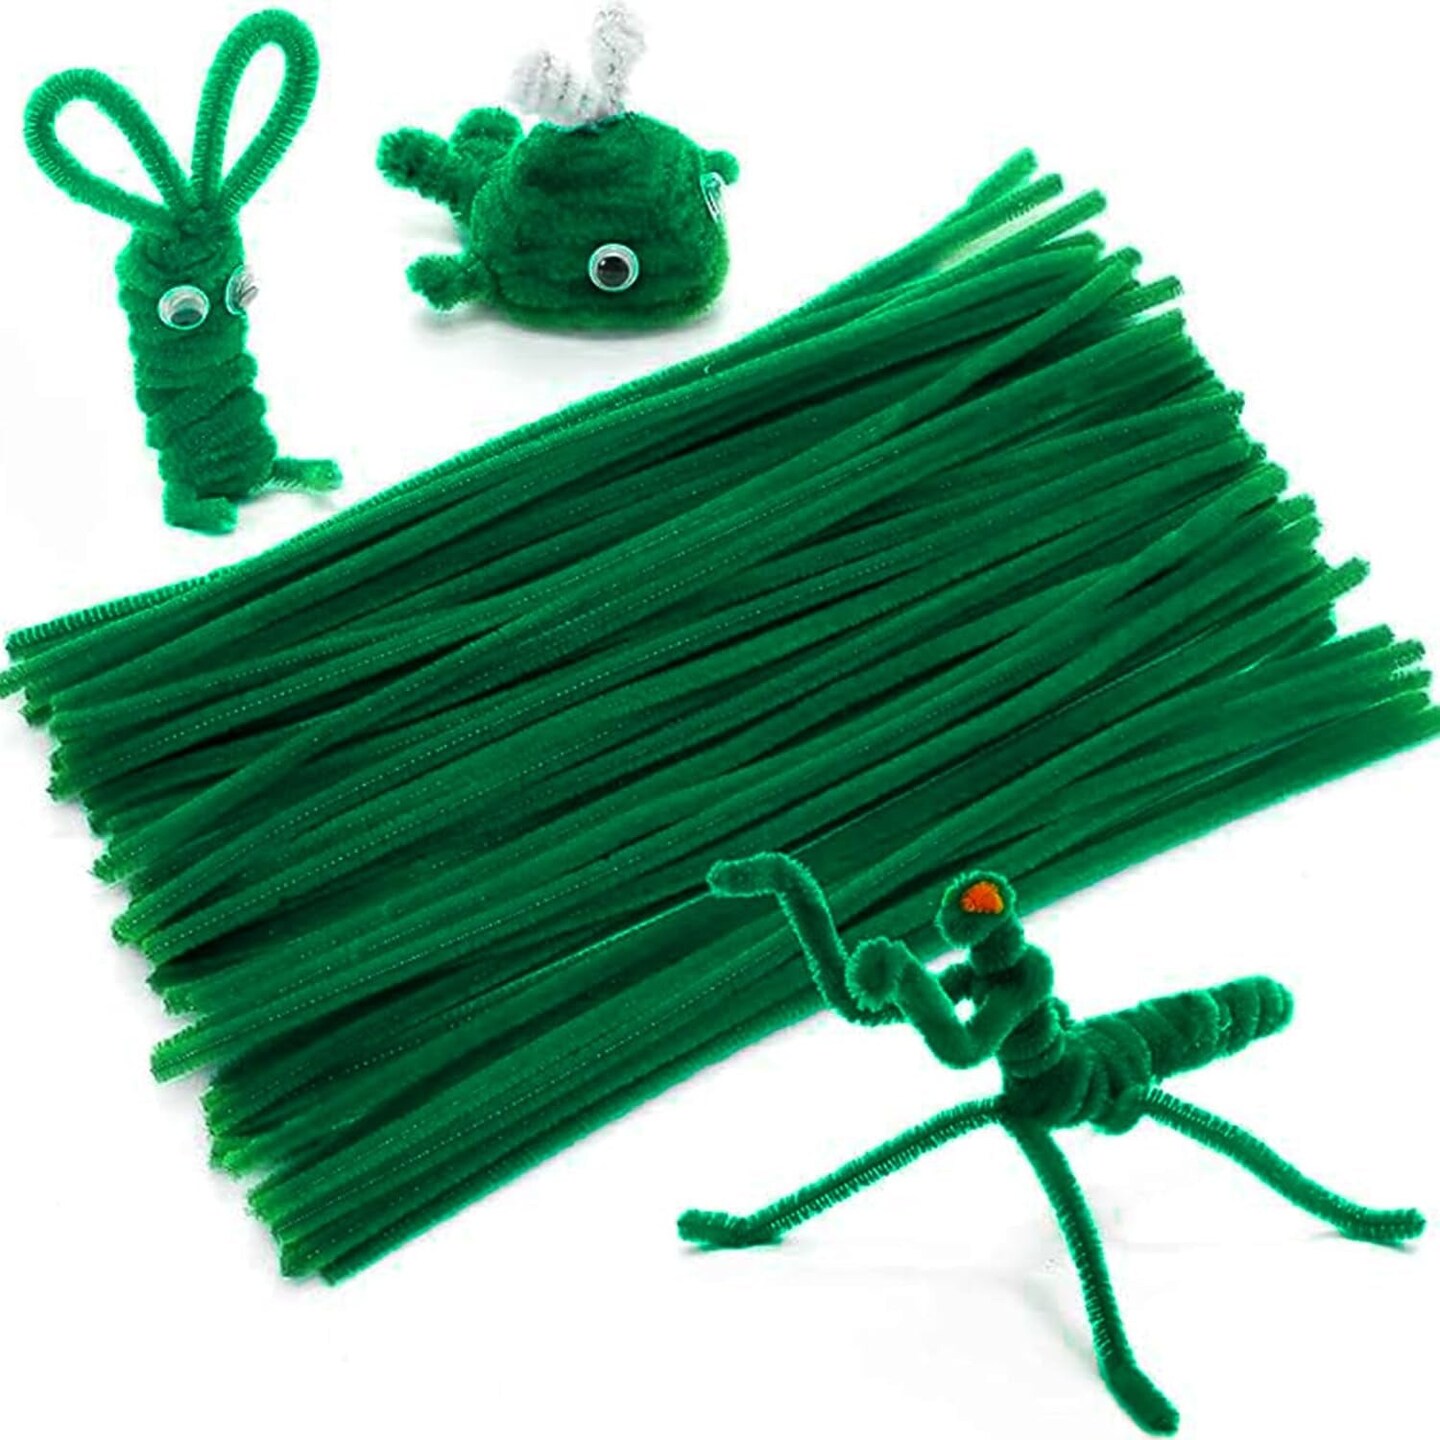 White Pipe Cleaners, 100psc Pipe Cleaners Craft Supplies, Chenille Stems,  Pipe Cleaners for Crafts, Art and Craft Supplies 